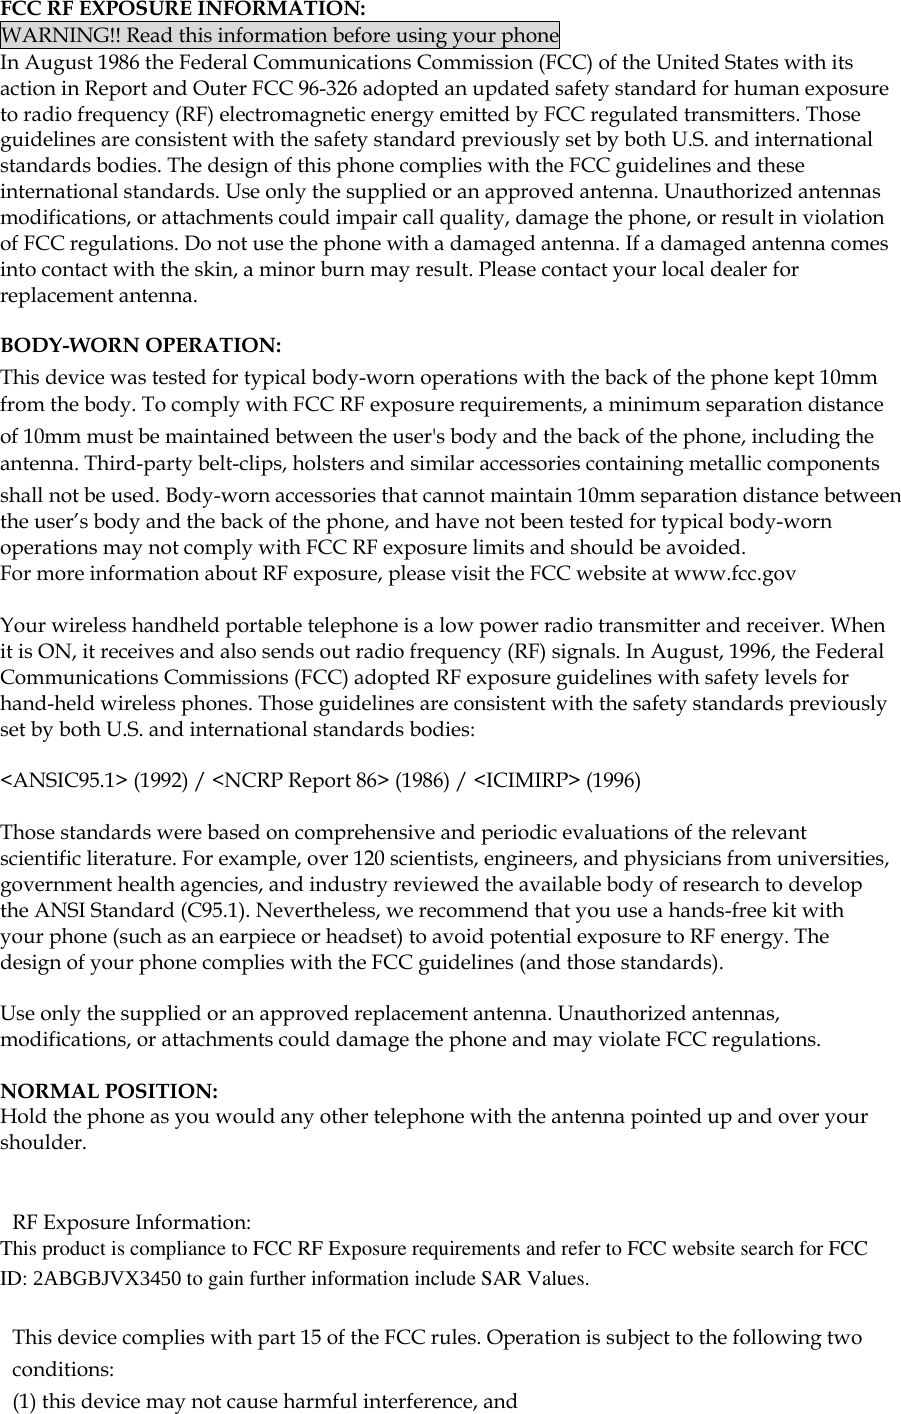  FCC RF EXPOSURE INFORMATION: WARNING!! Read this information before using your phone In August 1986 the Federal Communications Commission (FCC) of the United States with its action in Report and Outer FCC 96-326 adopted an updated safety standard for human exposure to radio frequency (RF) electromagnetic energy emitted by FCC regulated transmitters. Those guidelines are consistent with the safety standard previously set by both U.S. and international standards bodies. The design of this phone complies with the FCC guidelines and these international standards. Use only the supplied or an approved antenna. Unauthorized antennas modifications, or attachments could impair call quality, damage the phone, or result in violation of FCC regulations. Do not use the phone with a damaged antenna. If a damaged antenna comes into contact with the skin, a minor burn may result. Please contact your local dealer for replacement antenna.  BODY-WORN OPERATION: This device was tested for typical body-worn operations with the back of the phone kept 10mm from the body. To comply with FCC RF exposure requirements, a minimum separation distance of 10mm must be maintained between the user&apos;s body and the back of the phone, including the antenna. Third-party belt-clips, holsters and similar accessories containing metallic components shall not be used. Body-worn accessories that cannot maintain 10mm separation distance between the user’s body and the back of the phone, and have not been tested for typical body-worn operations may not comply with FCC RF exposure limits and should be avoided. For more information about RF exposure, please visit the FCC website at www.fcc.gov  Your wireless handheld portable telephone is a low power radio transmitter and receiver. When it is ON, it receives and also sends out radio frequency (RF) signals. In August, 1996, the Federal Communications Commissions (FCC) adopted RF exposure guidelines with safety levels for hand-held wireless phones. Those guidelines are consistent with the safety standards previously set by both U.S. and international standards bodies:  &lt;ANSIC95.1&gt; (1992) / &lt;NCRP Report 86&gt; (1986) / &lt;ICIMIRP&gt; (1996)  Those standards were based on comprehensive and periodic evaluations of the relevant scientific literature. For example, over 120 scientists, engineers, and physicians from universities, government health agencies, and industry reviewed the available body of research to develop the ANSI Standard (C95.1). Nevertheless, we recommend that you use a hands-free kit with your phone (such as an earpiece or headset) to avoid potential exposure to RF energy. The design of your phone complies with the FCC guidelines (and those standards).  Use only the supplied or an approved replacement antenna. Unauthorized antennas, modifications, or attachments could damage the phone and may violate FCC regulations.   NORMAL POSITION:  Hold the phone as you would any other telephone with the antenna pointed up and over your shoulder.   RF Exposure Information: This product is compliance to FCC RF Exposure requirements and refer to FCC website search for FCC ID: 2ABGBJVX3450 to gain further information include SAR Values.    This device complies with part 15 of the FCC rules. Operation is subject to the following two conditions: (1) this device may not cause harmful interference, and 